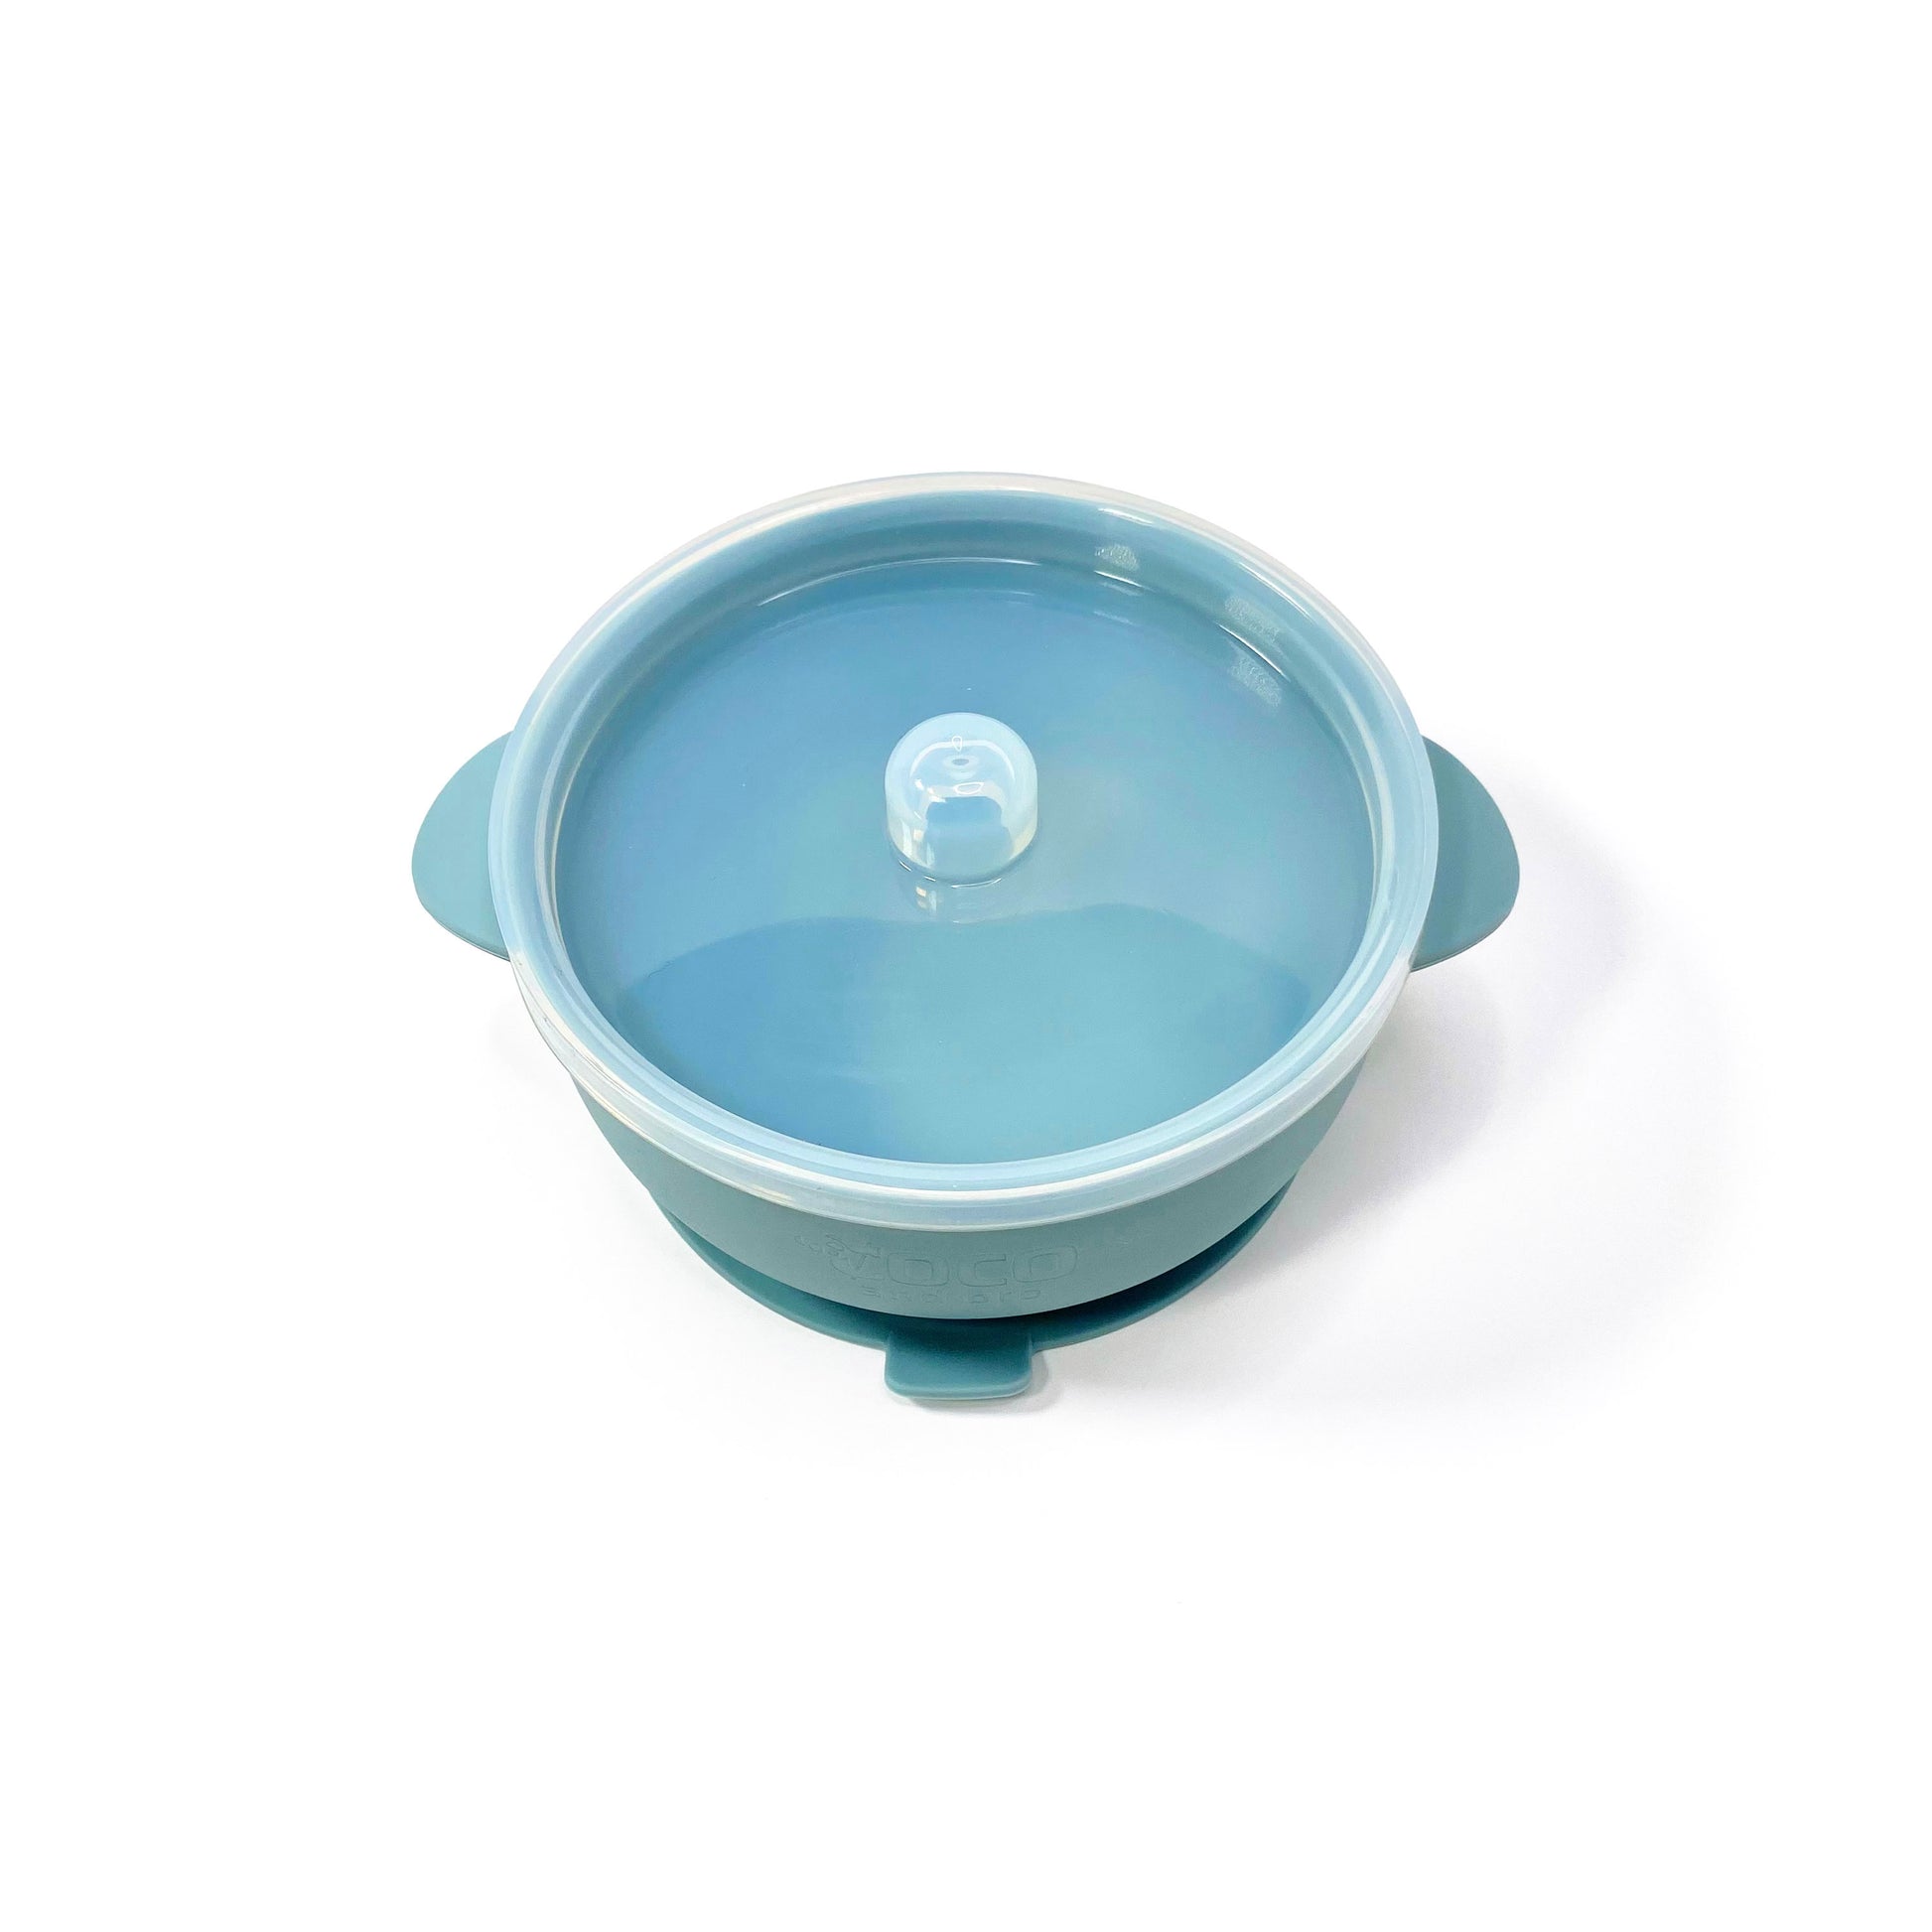 A sky blue silicone children’s feeding bowl, with lid and suction cup. Image shows the bowl with lid attached.